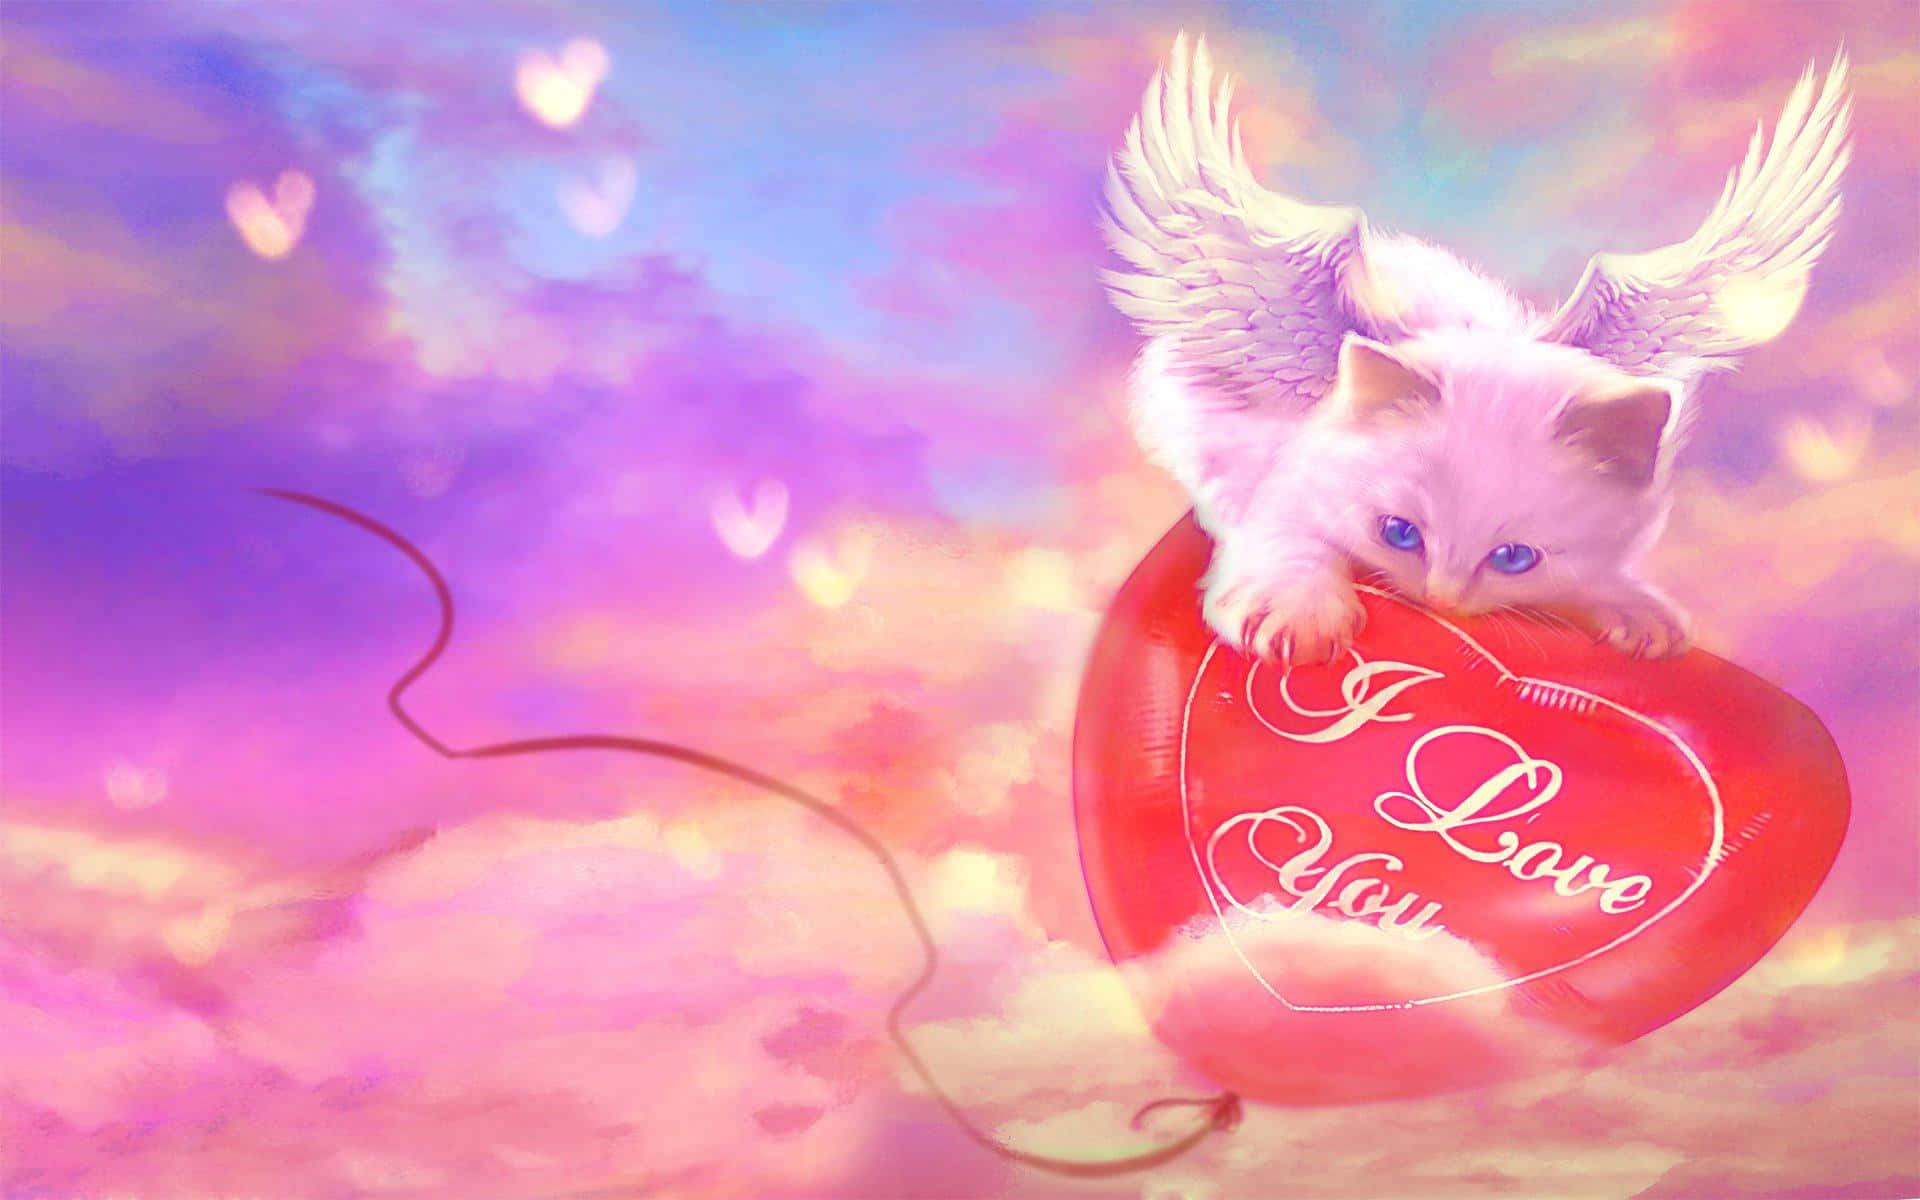 A Kitten With Wings Flying Over A Heart Shaped Balloon